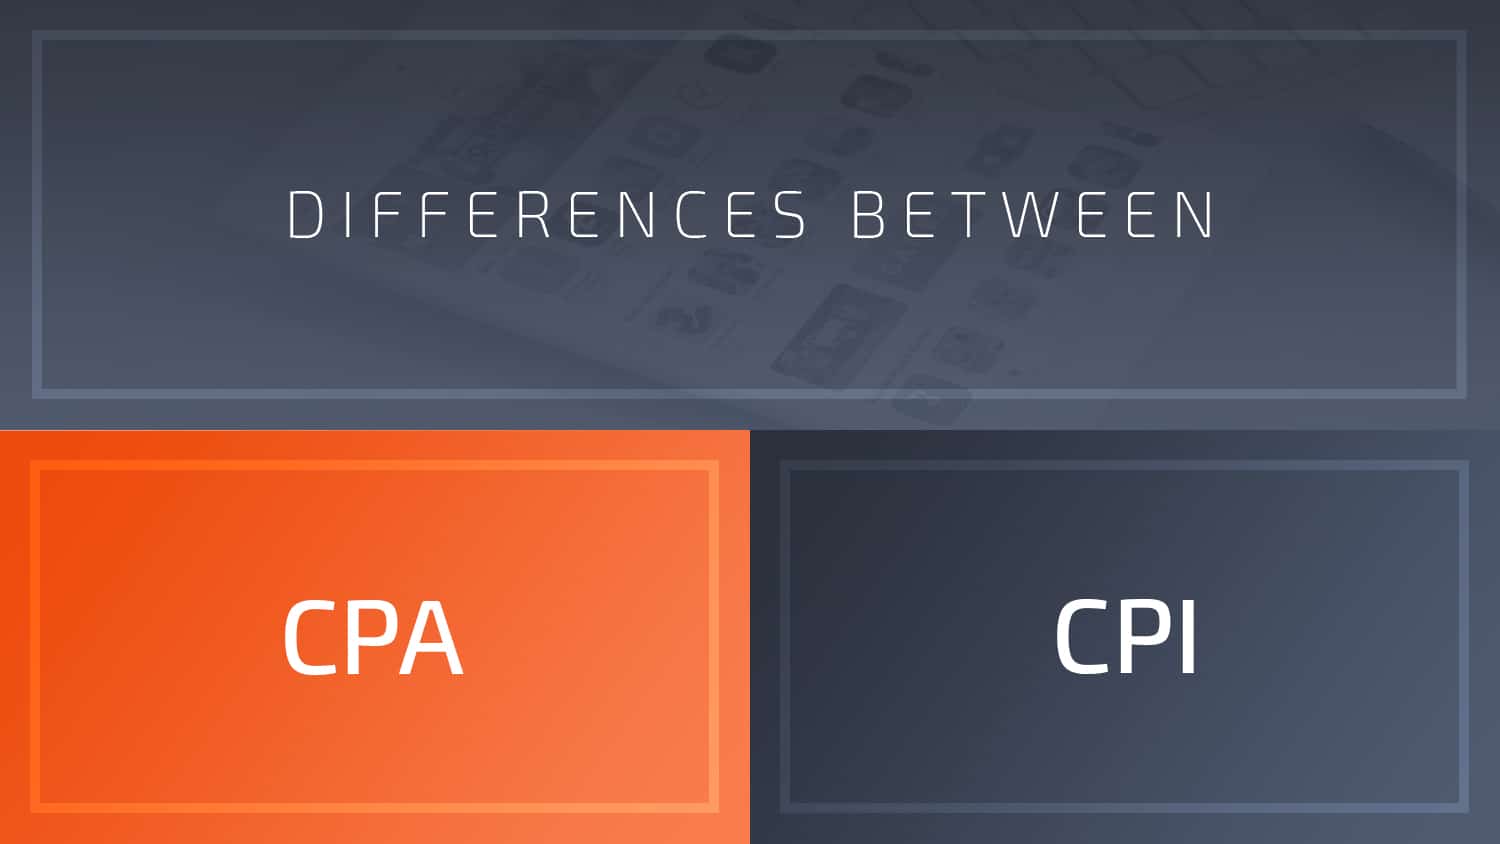 cpa and cpi